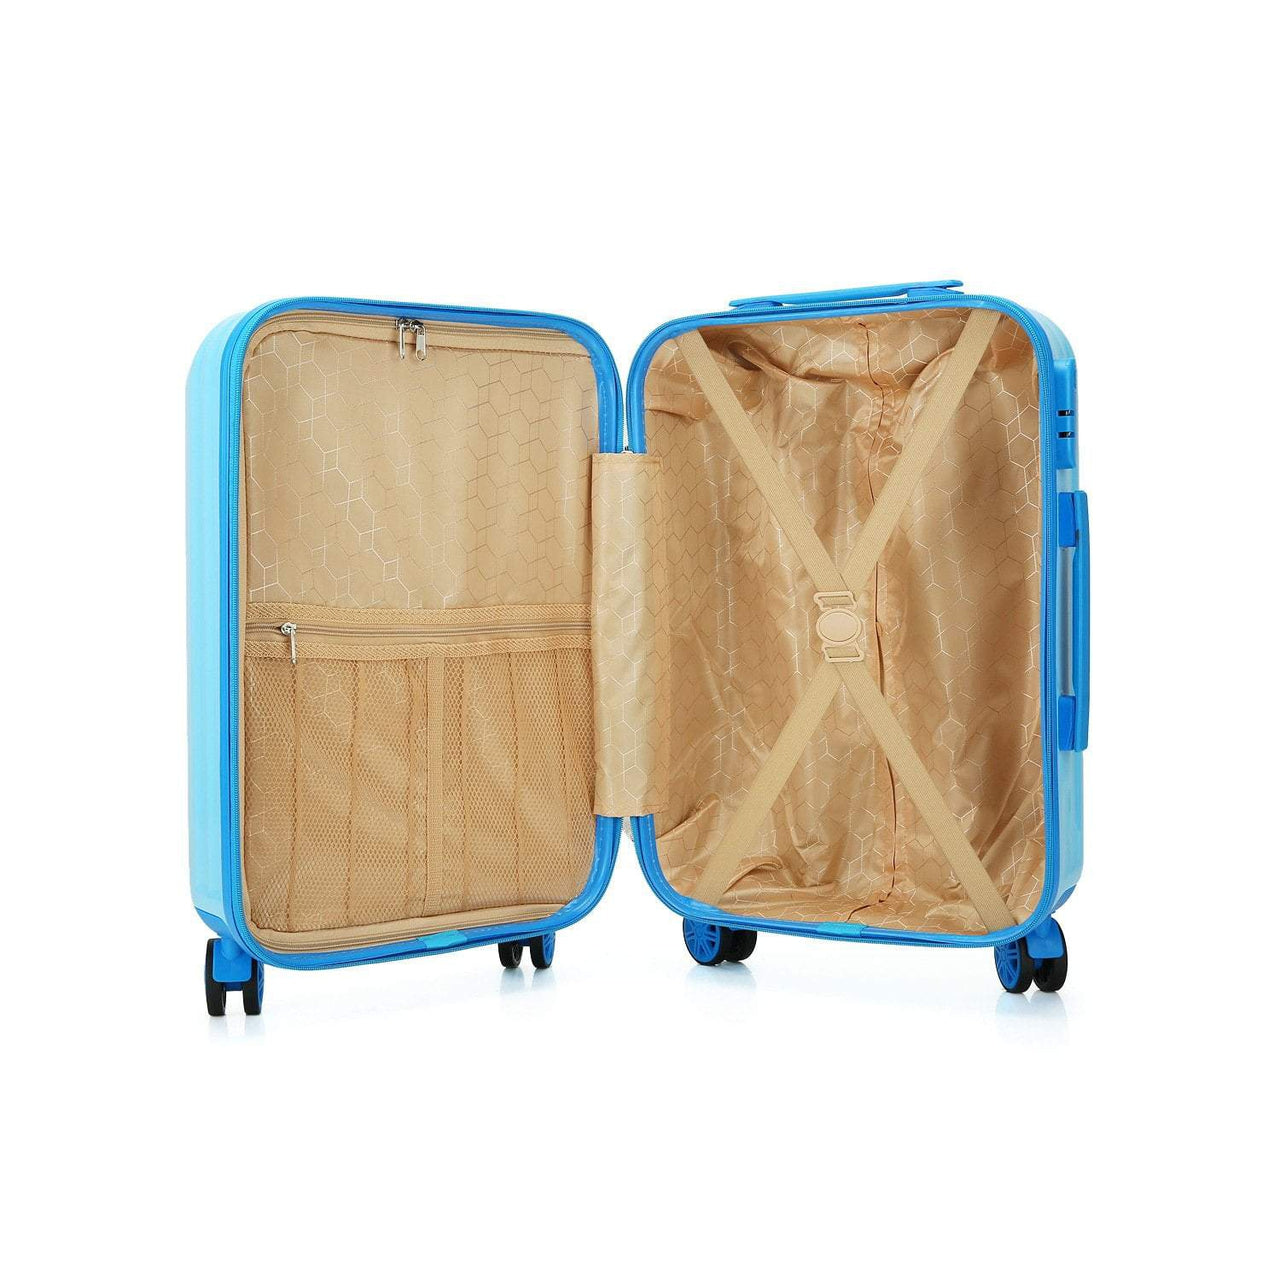 Valise Fille Design Animaux